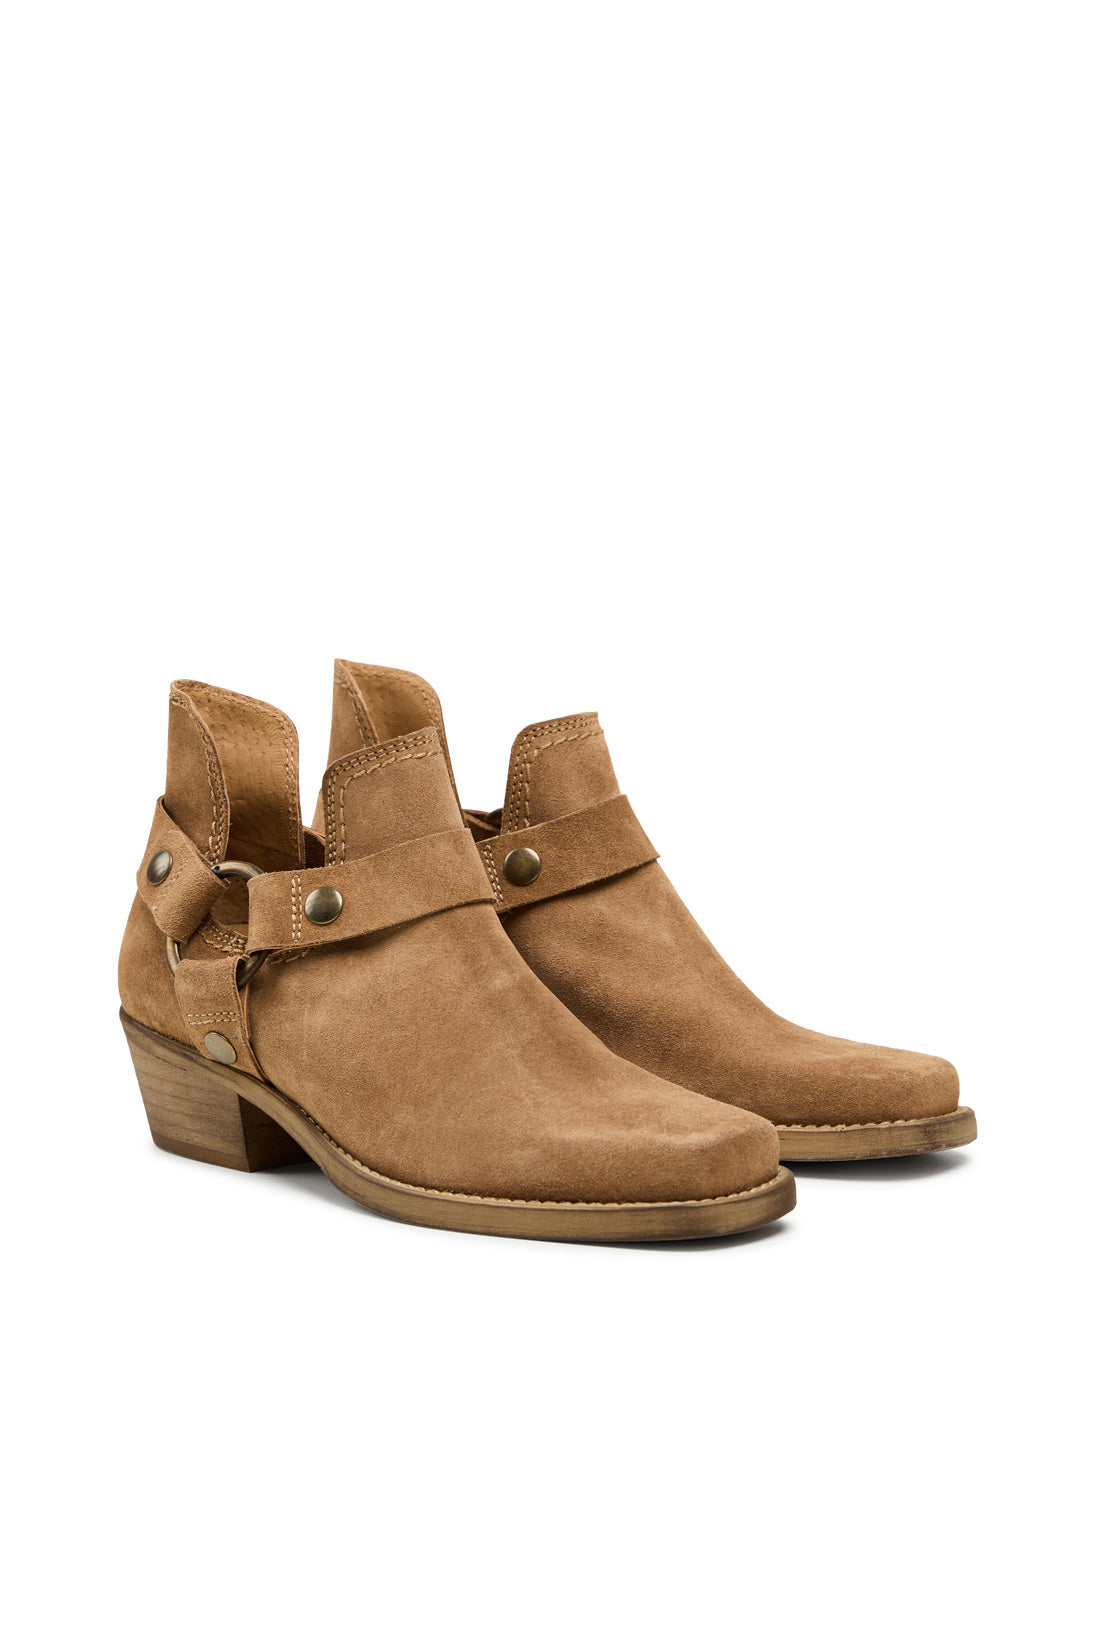 Pavement Lauryn Leather Boot - Taupe Suede - RUM Amsterdam